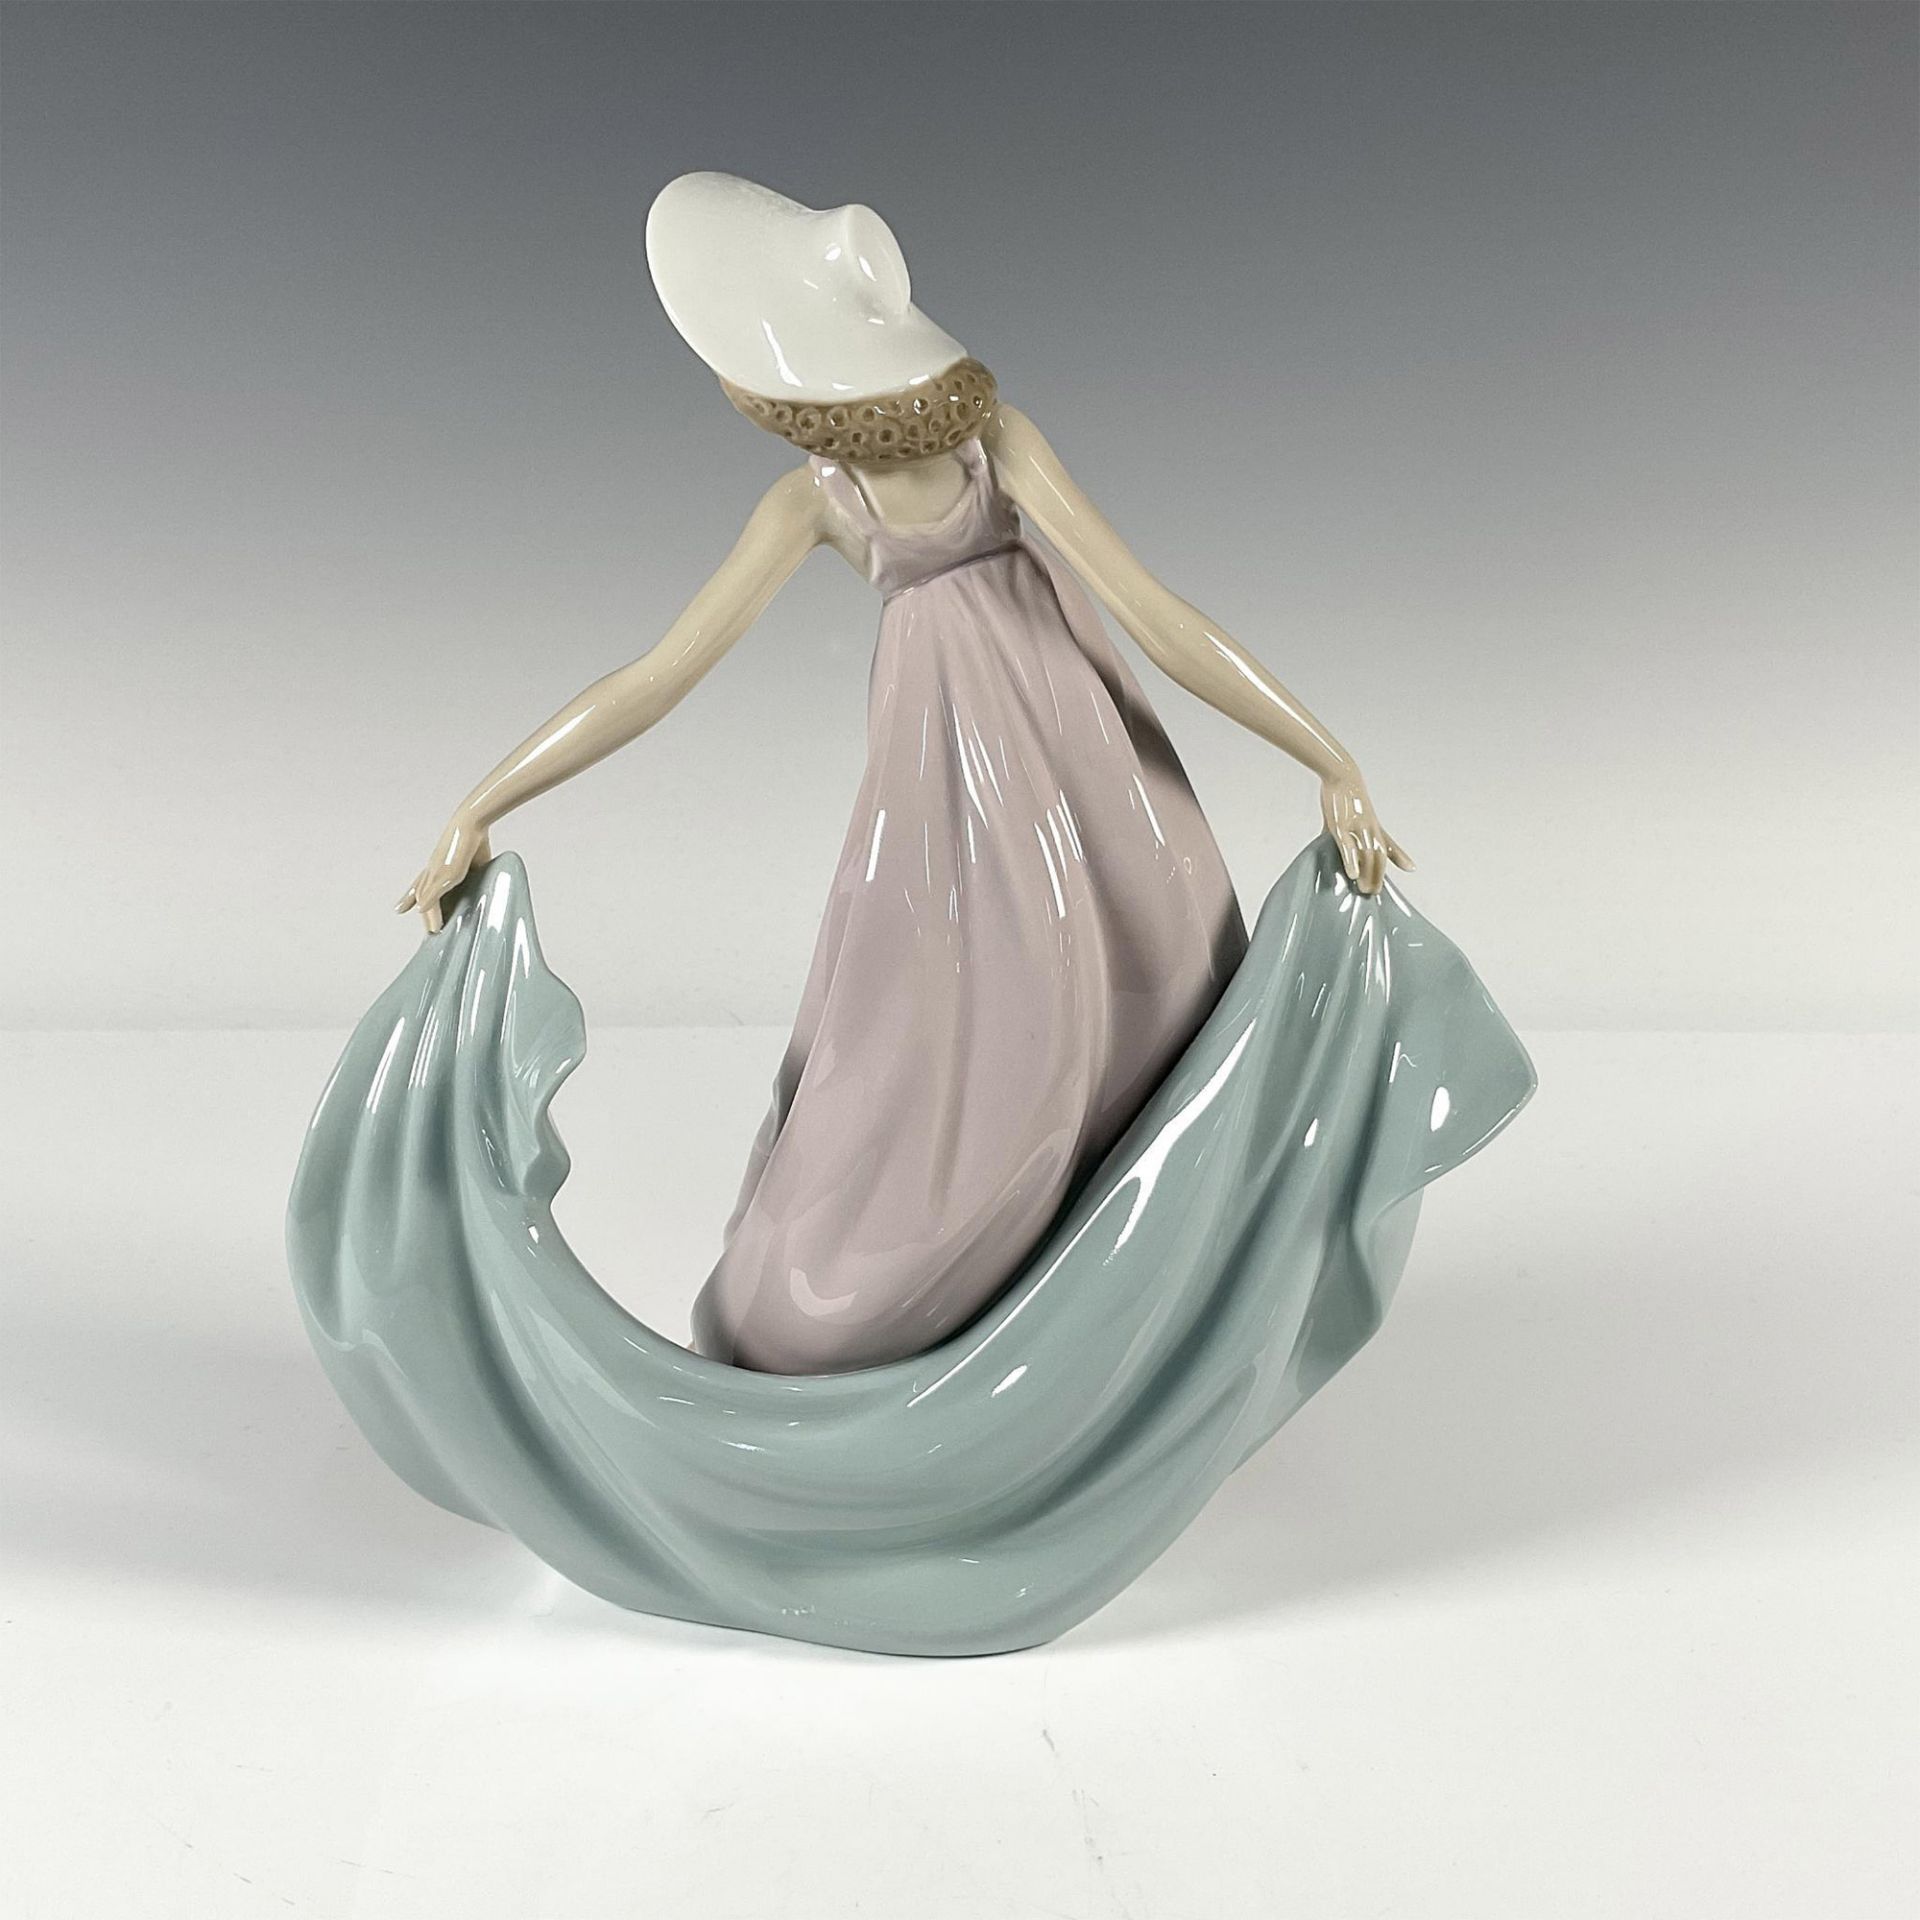 Lladro Porcelain Figurine, May Dance 1005663 - Image 2 of 3